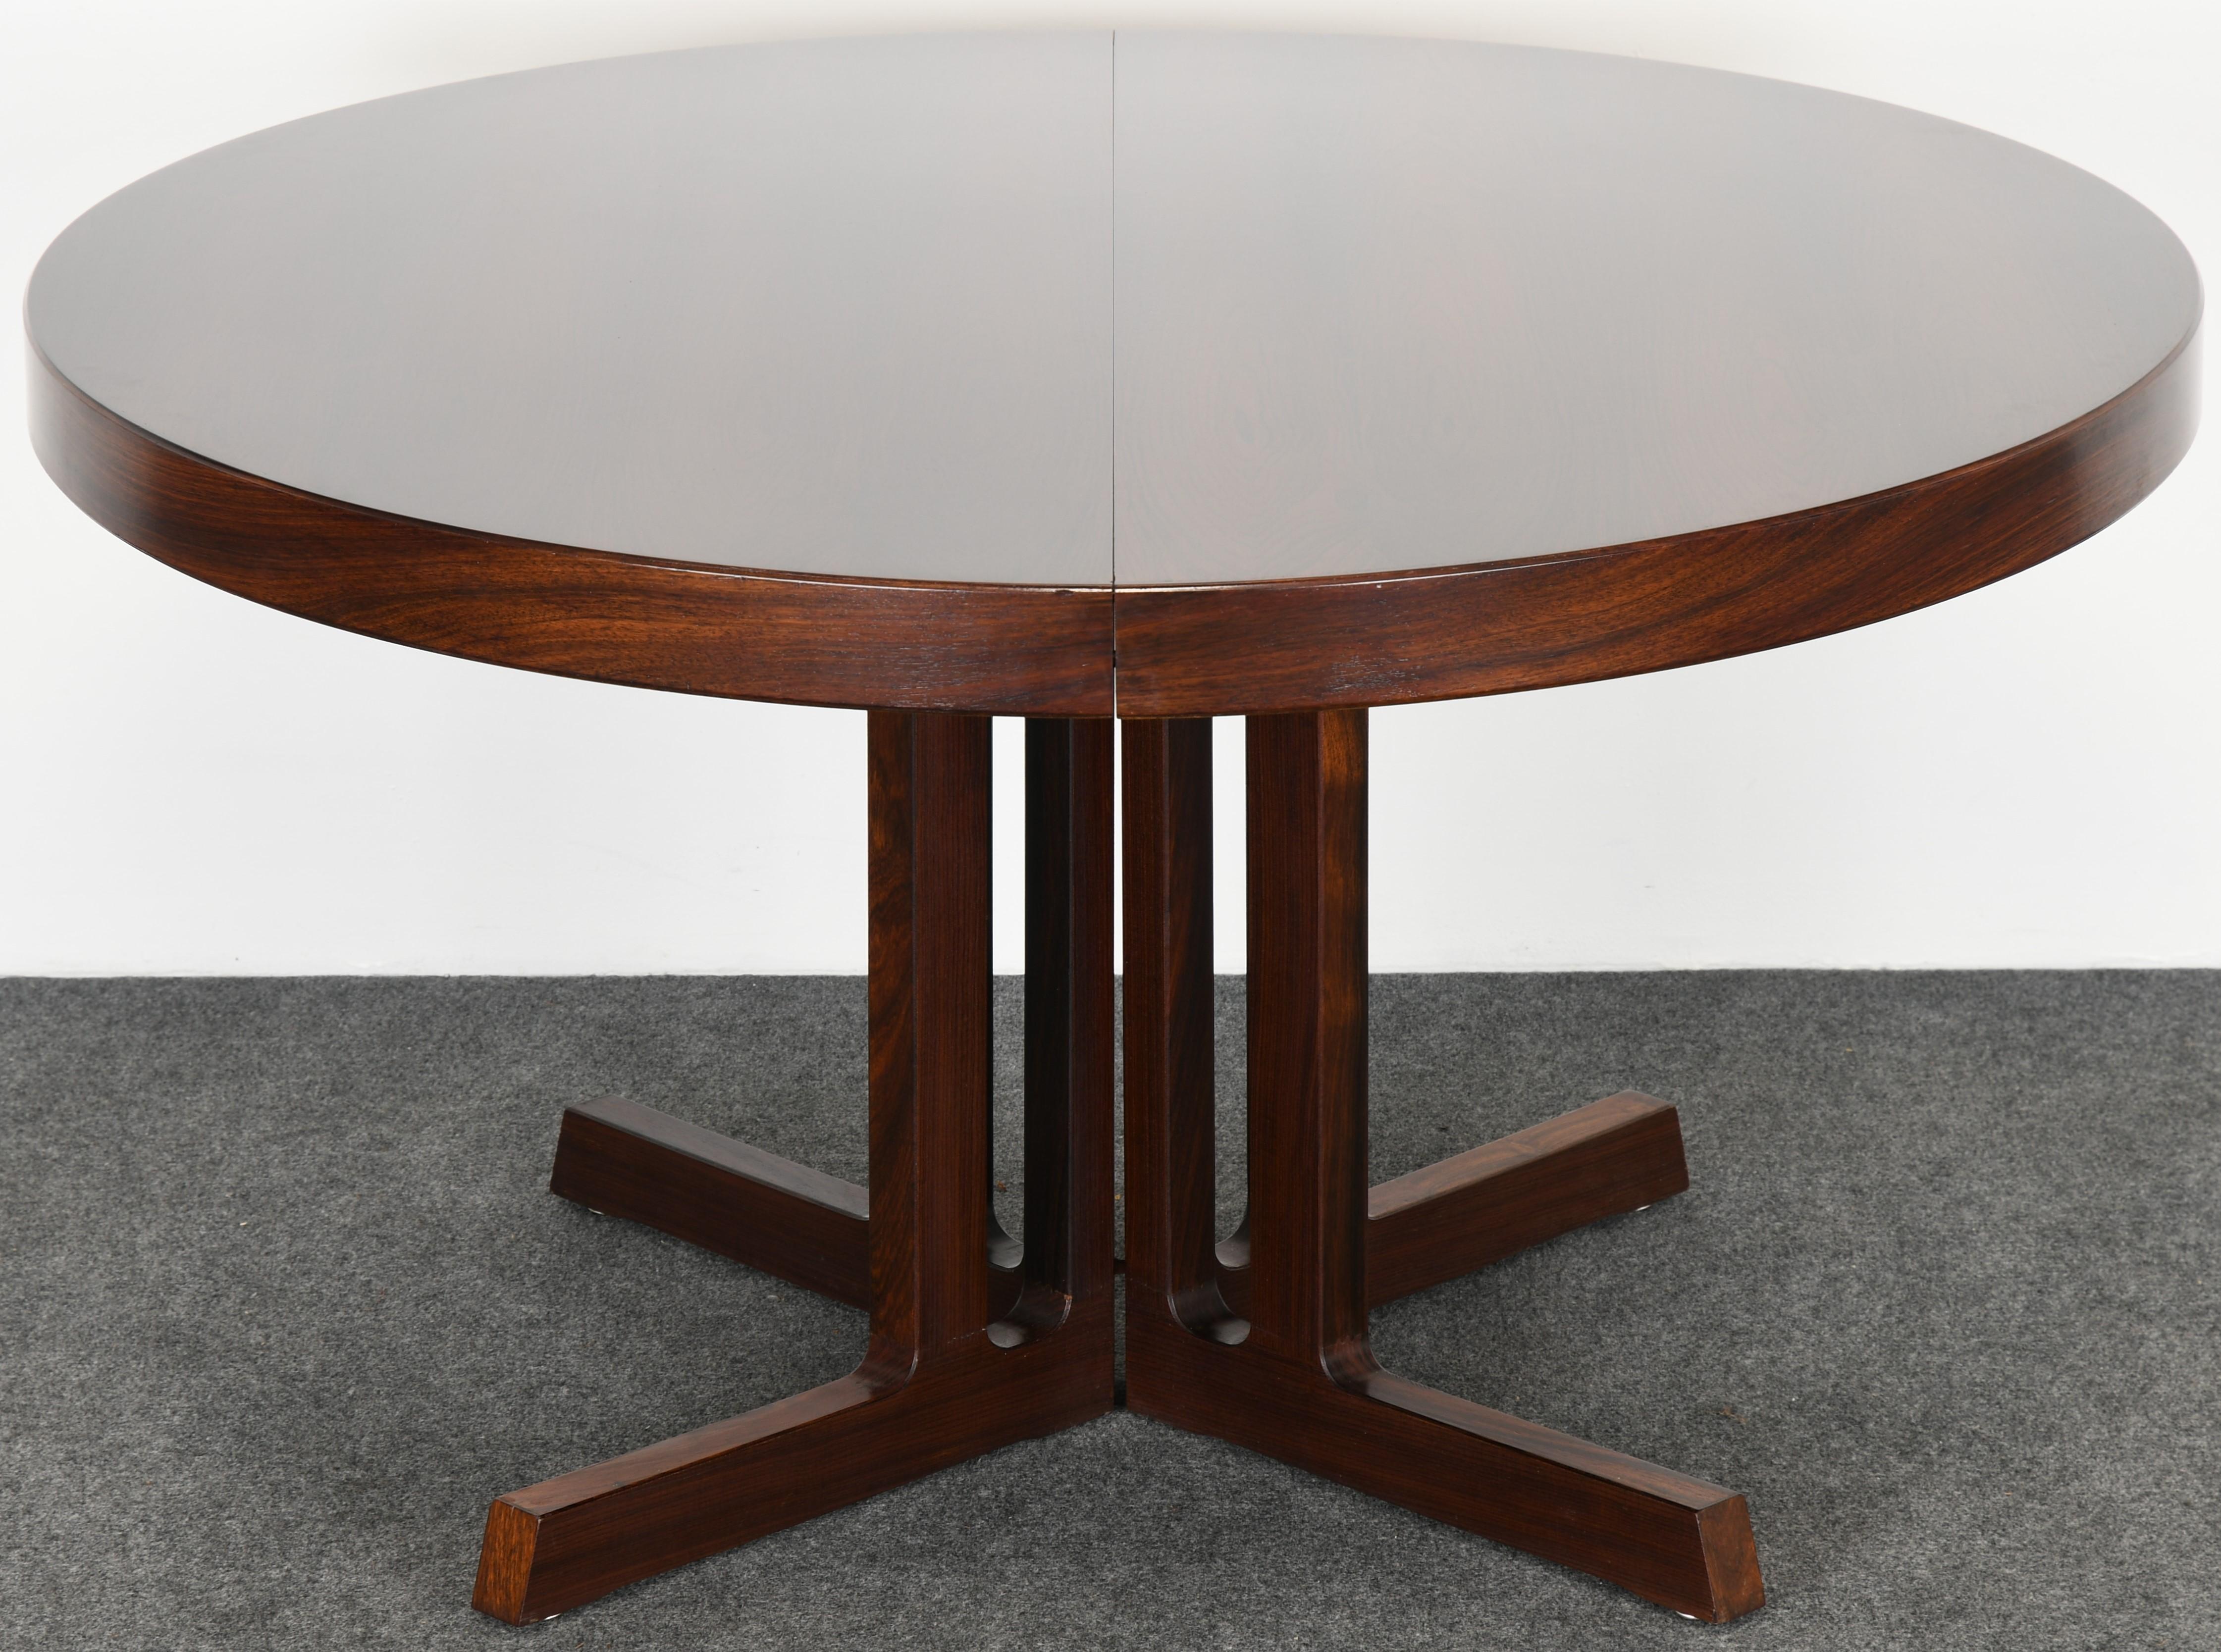 A functional Danish rosewood Mid-Century Modern Scandinavian Modern dining table designed by Johannes Andersen. The table has a beautiful rosewood grain, stately cross base with three leaves. It is structurally sound and in good